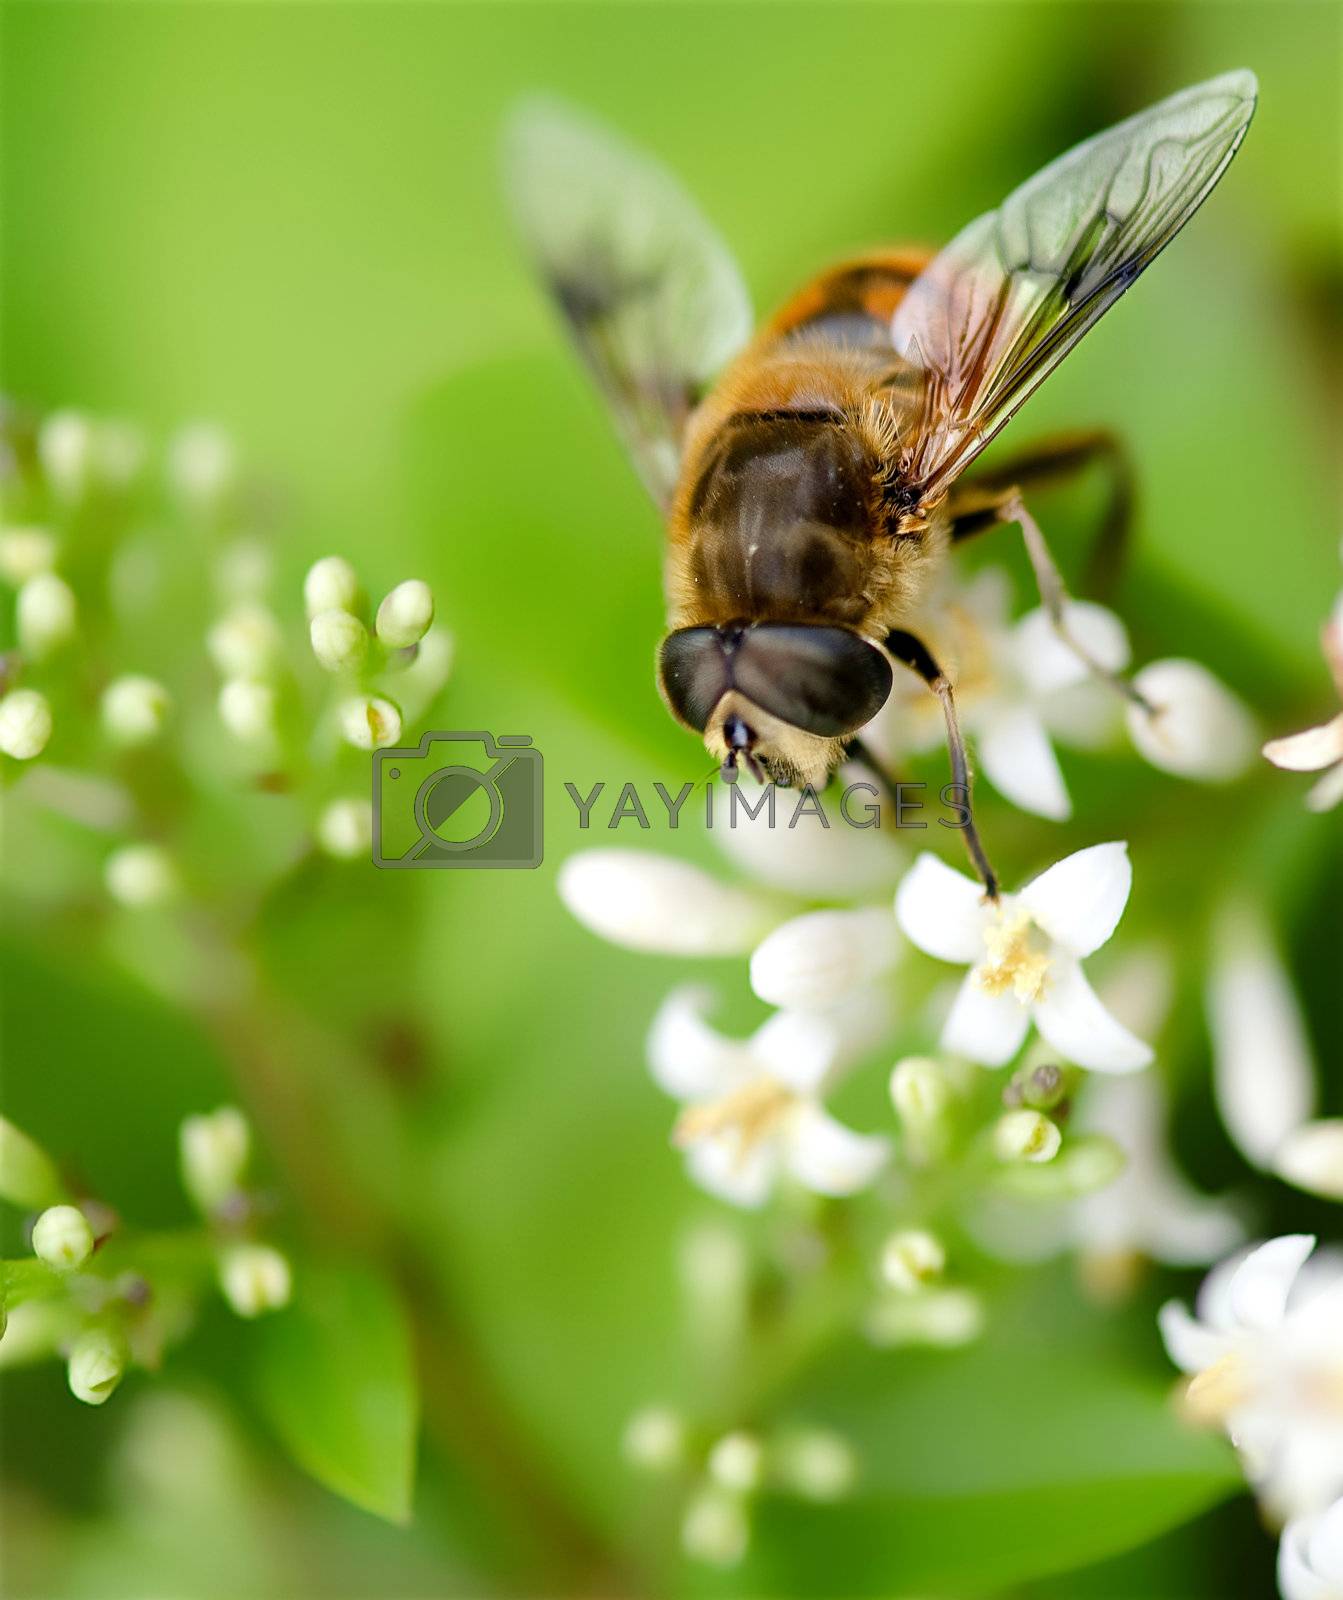 Royalty free image of bee and flower by jackq